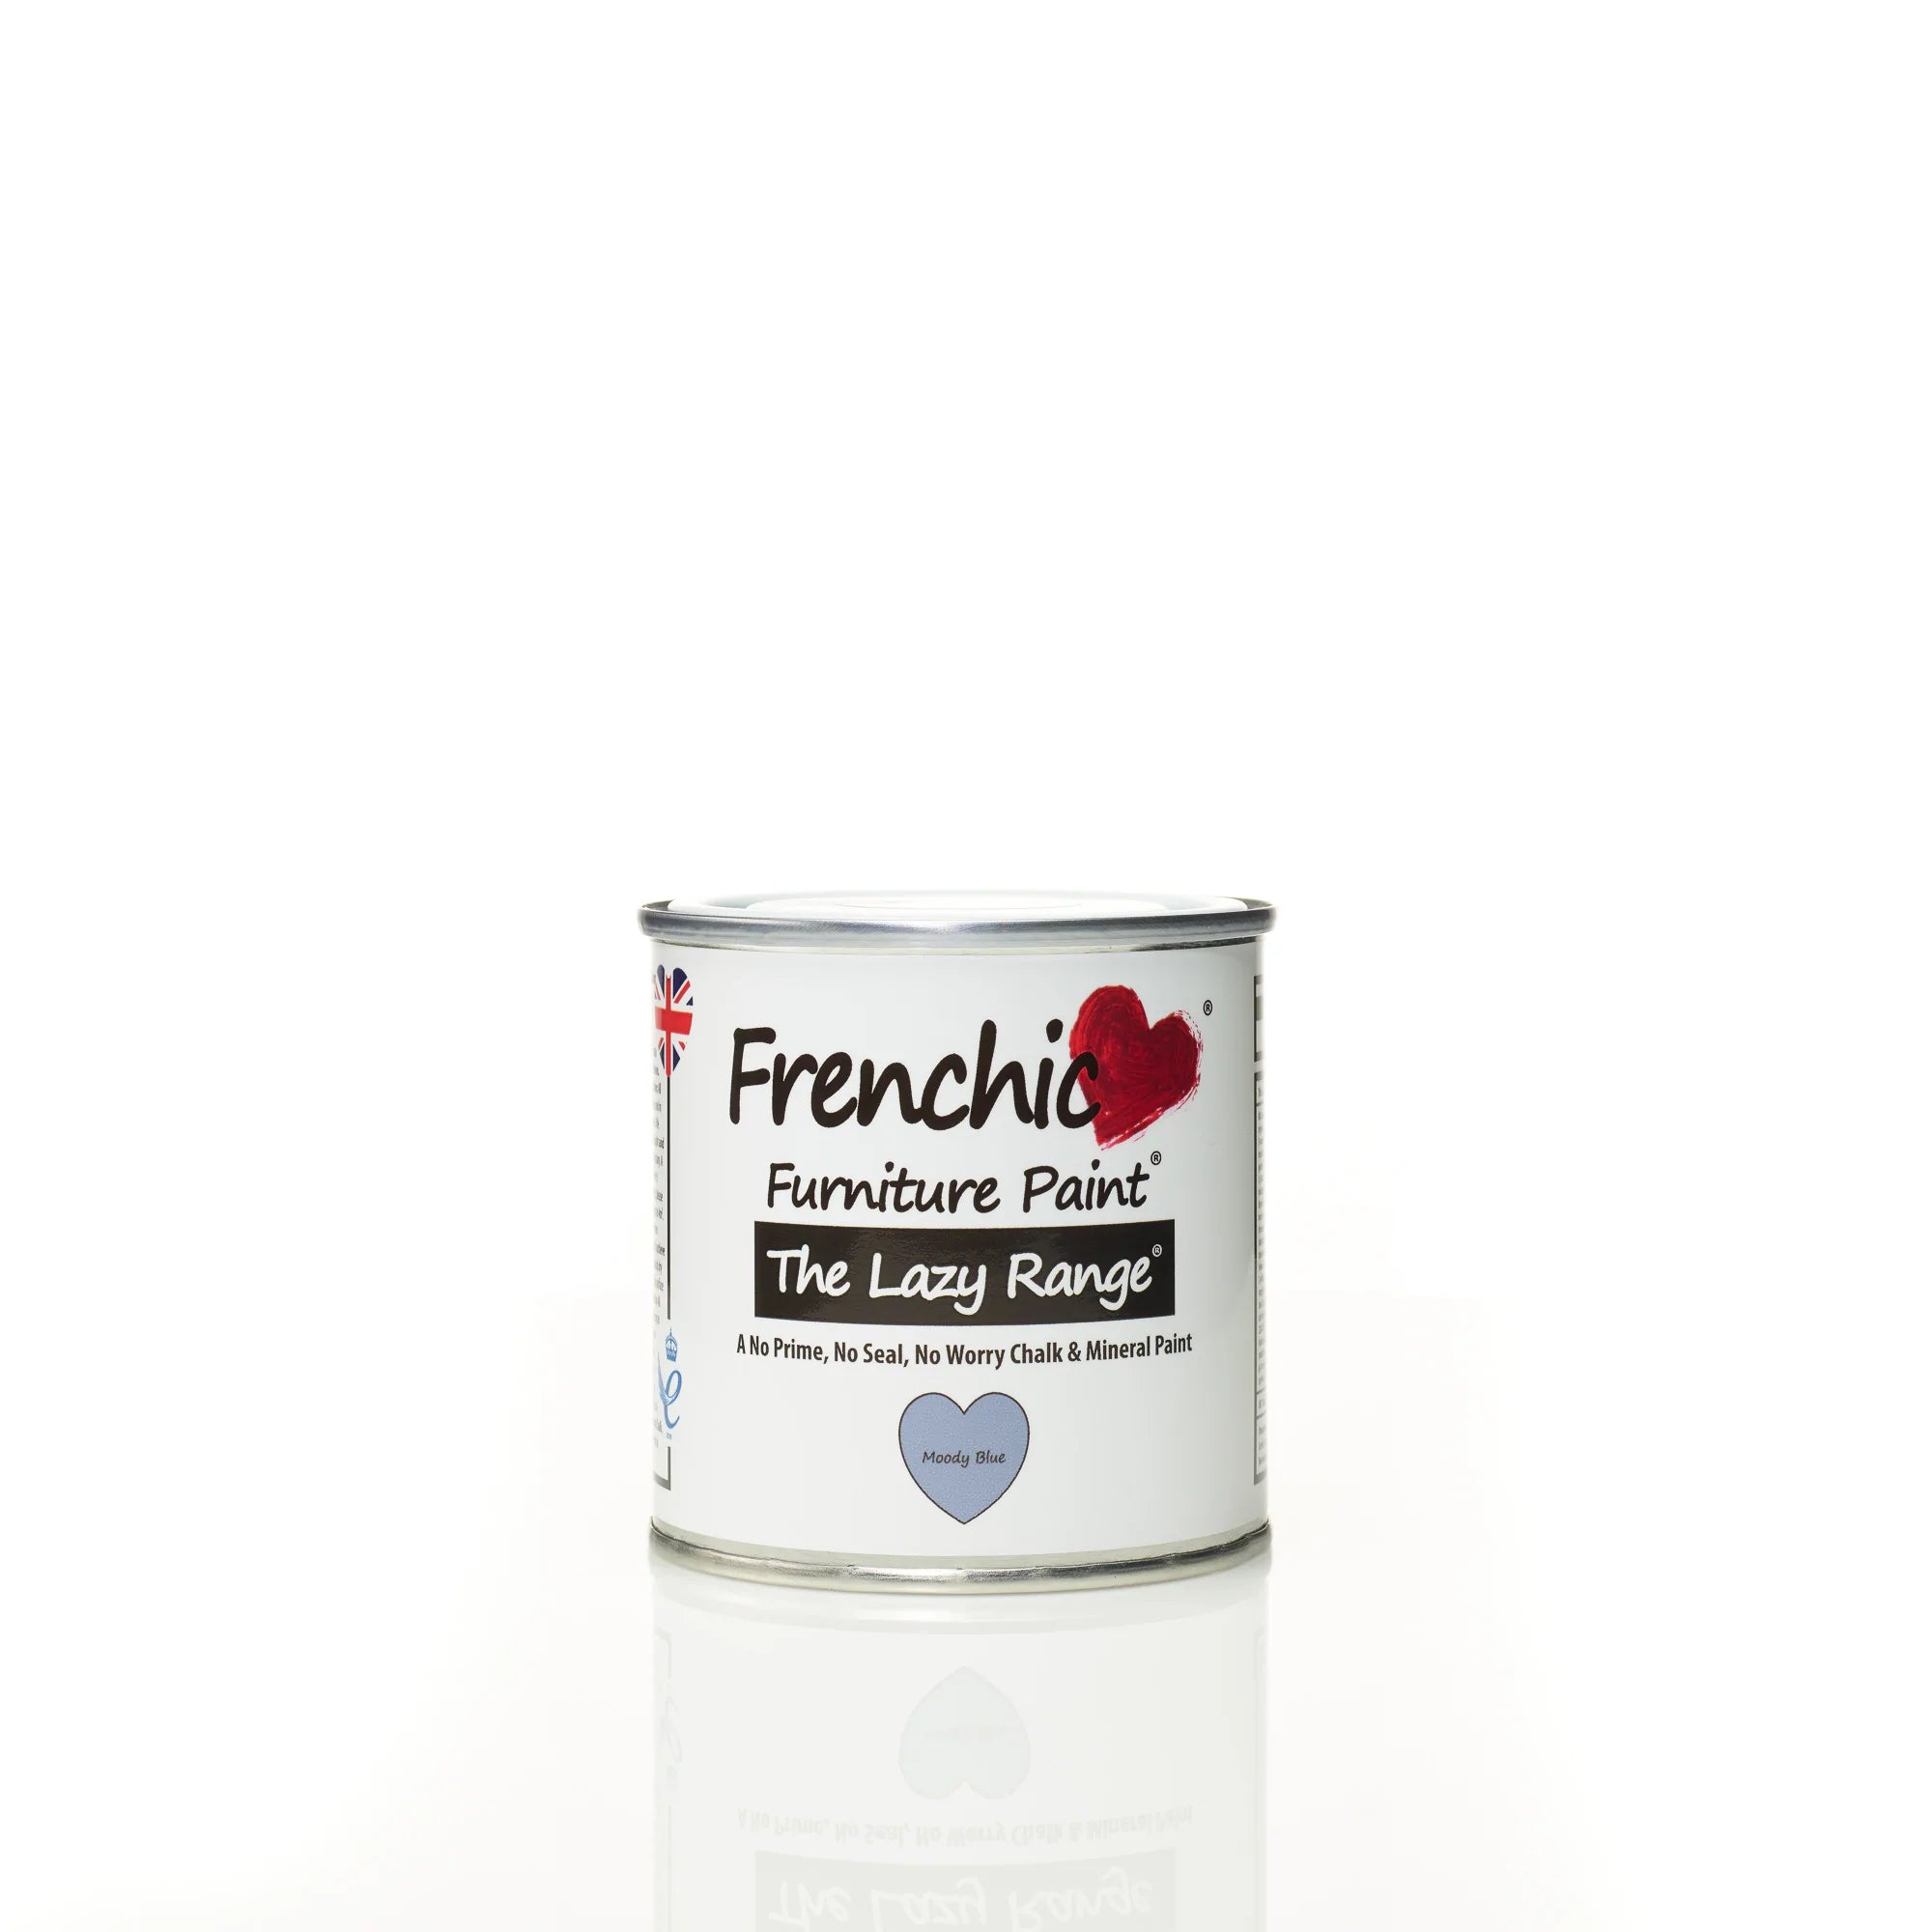 Frenchic Paint | Lazy Range - Moody Blue by Weirs of Baggot St